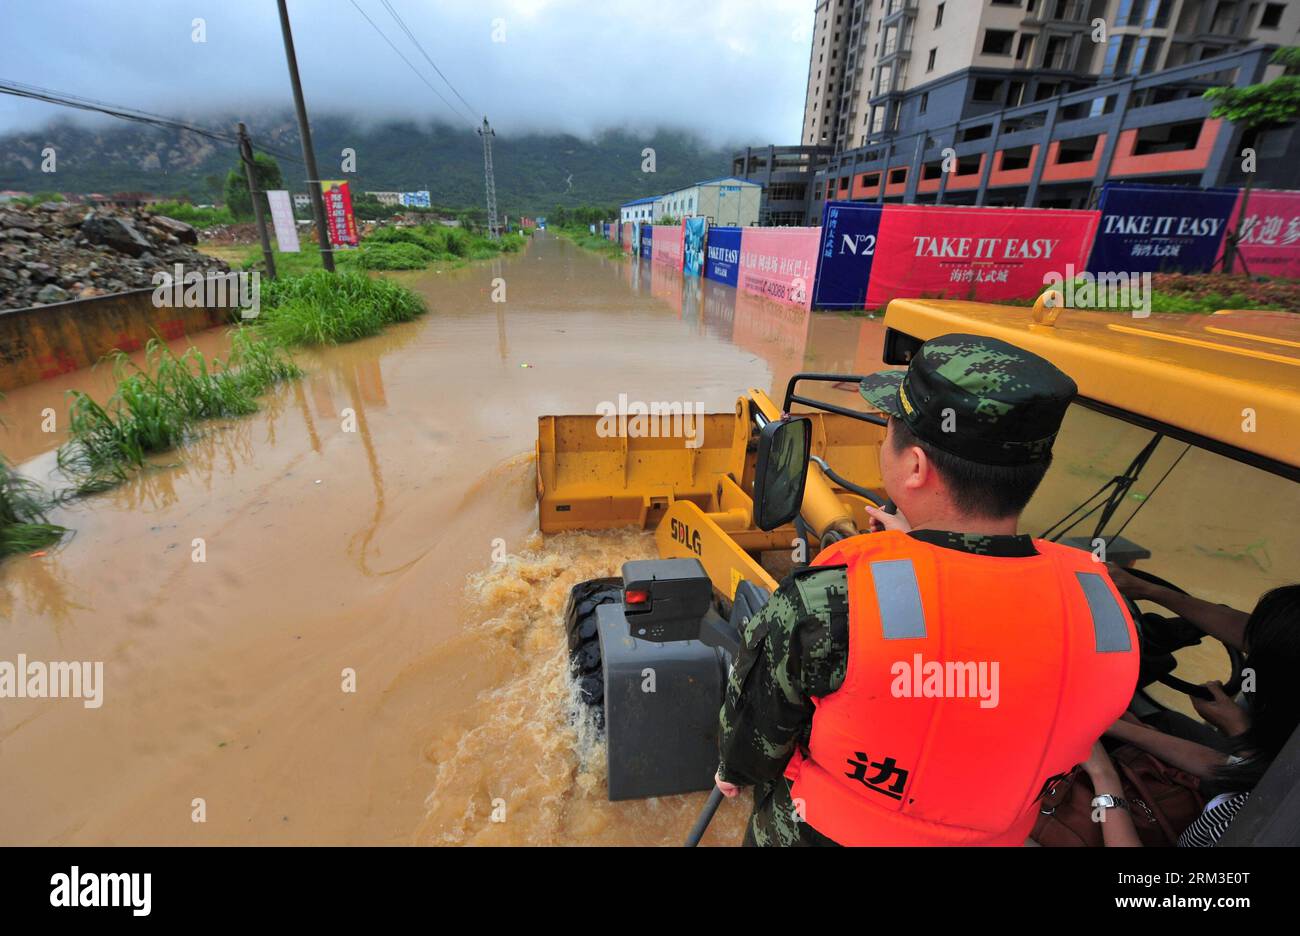 Bildnummer: 60157957  Datum: 19.07.2013  Copyright: imago/Xinhua (130719) -- LONGHAI, July 19, 2013 (Xinhua) -- Rescuers and journalists take a forklift to enter severely-flooded Gangwei Township in Longhai of Zhangzhou City, southeast China s Fujian Province, July 19, 2013. Tropical storm Cimaron made its landfall in Fujian Thursday evening, bringing heavy rain and strong gales to southern part of the province. Xiamen, Zhangzhou, Quanzhou and Putian were severely affected by the storm, with the rainfall in some regions like Longhai reaching 520 millimeters on Friday. About 123,000 residents w Stock Photo